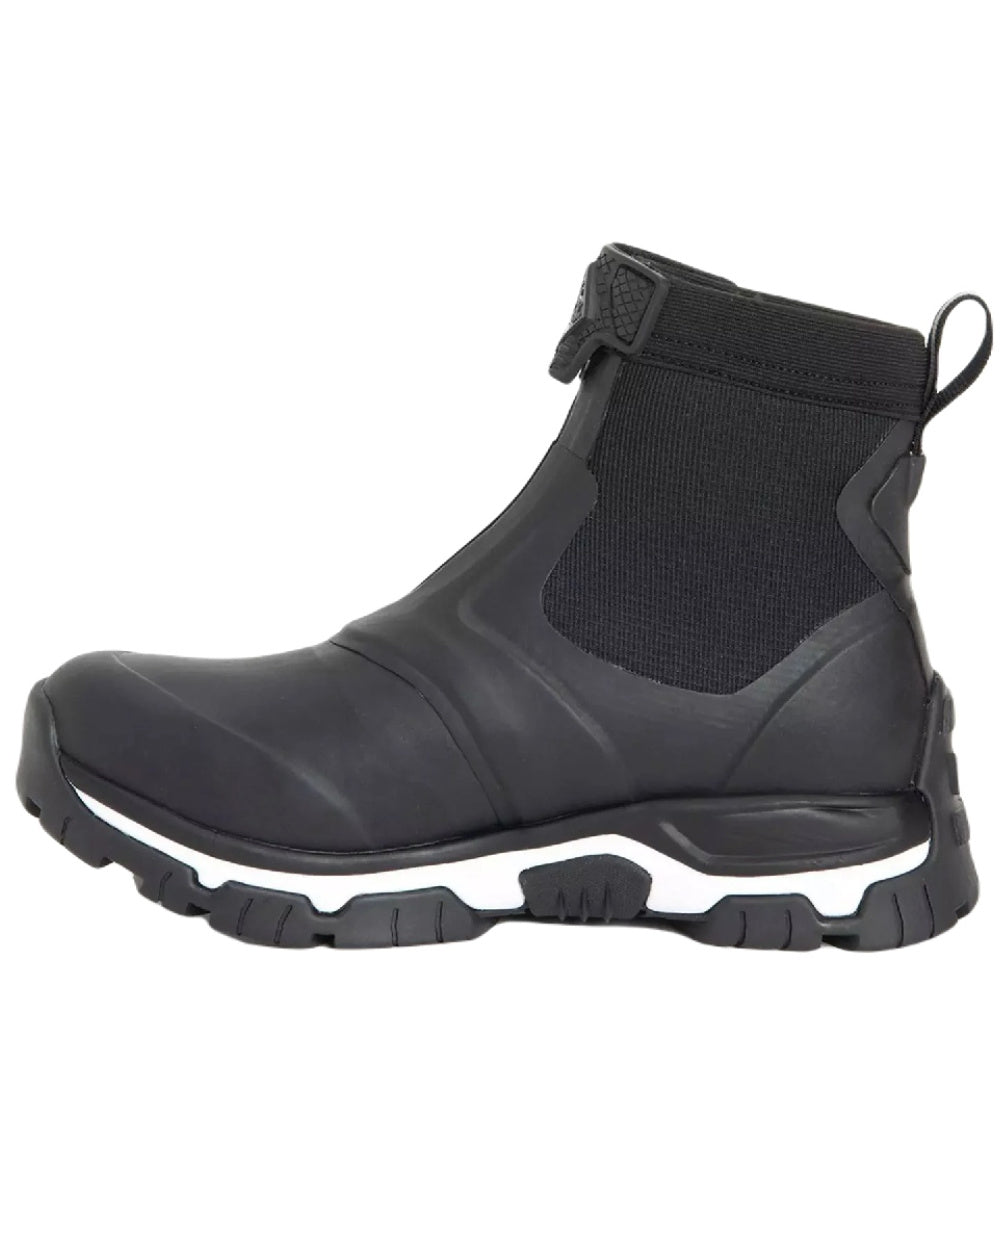 Black Coloured Muck Boots Ladies Apex Zip Mid Boots On A White Background 